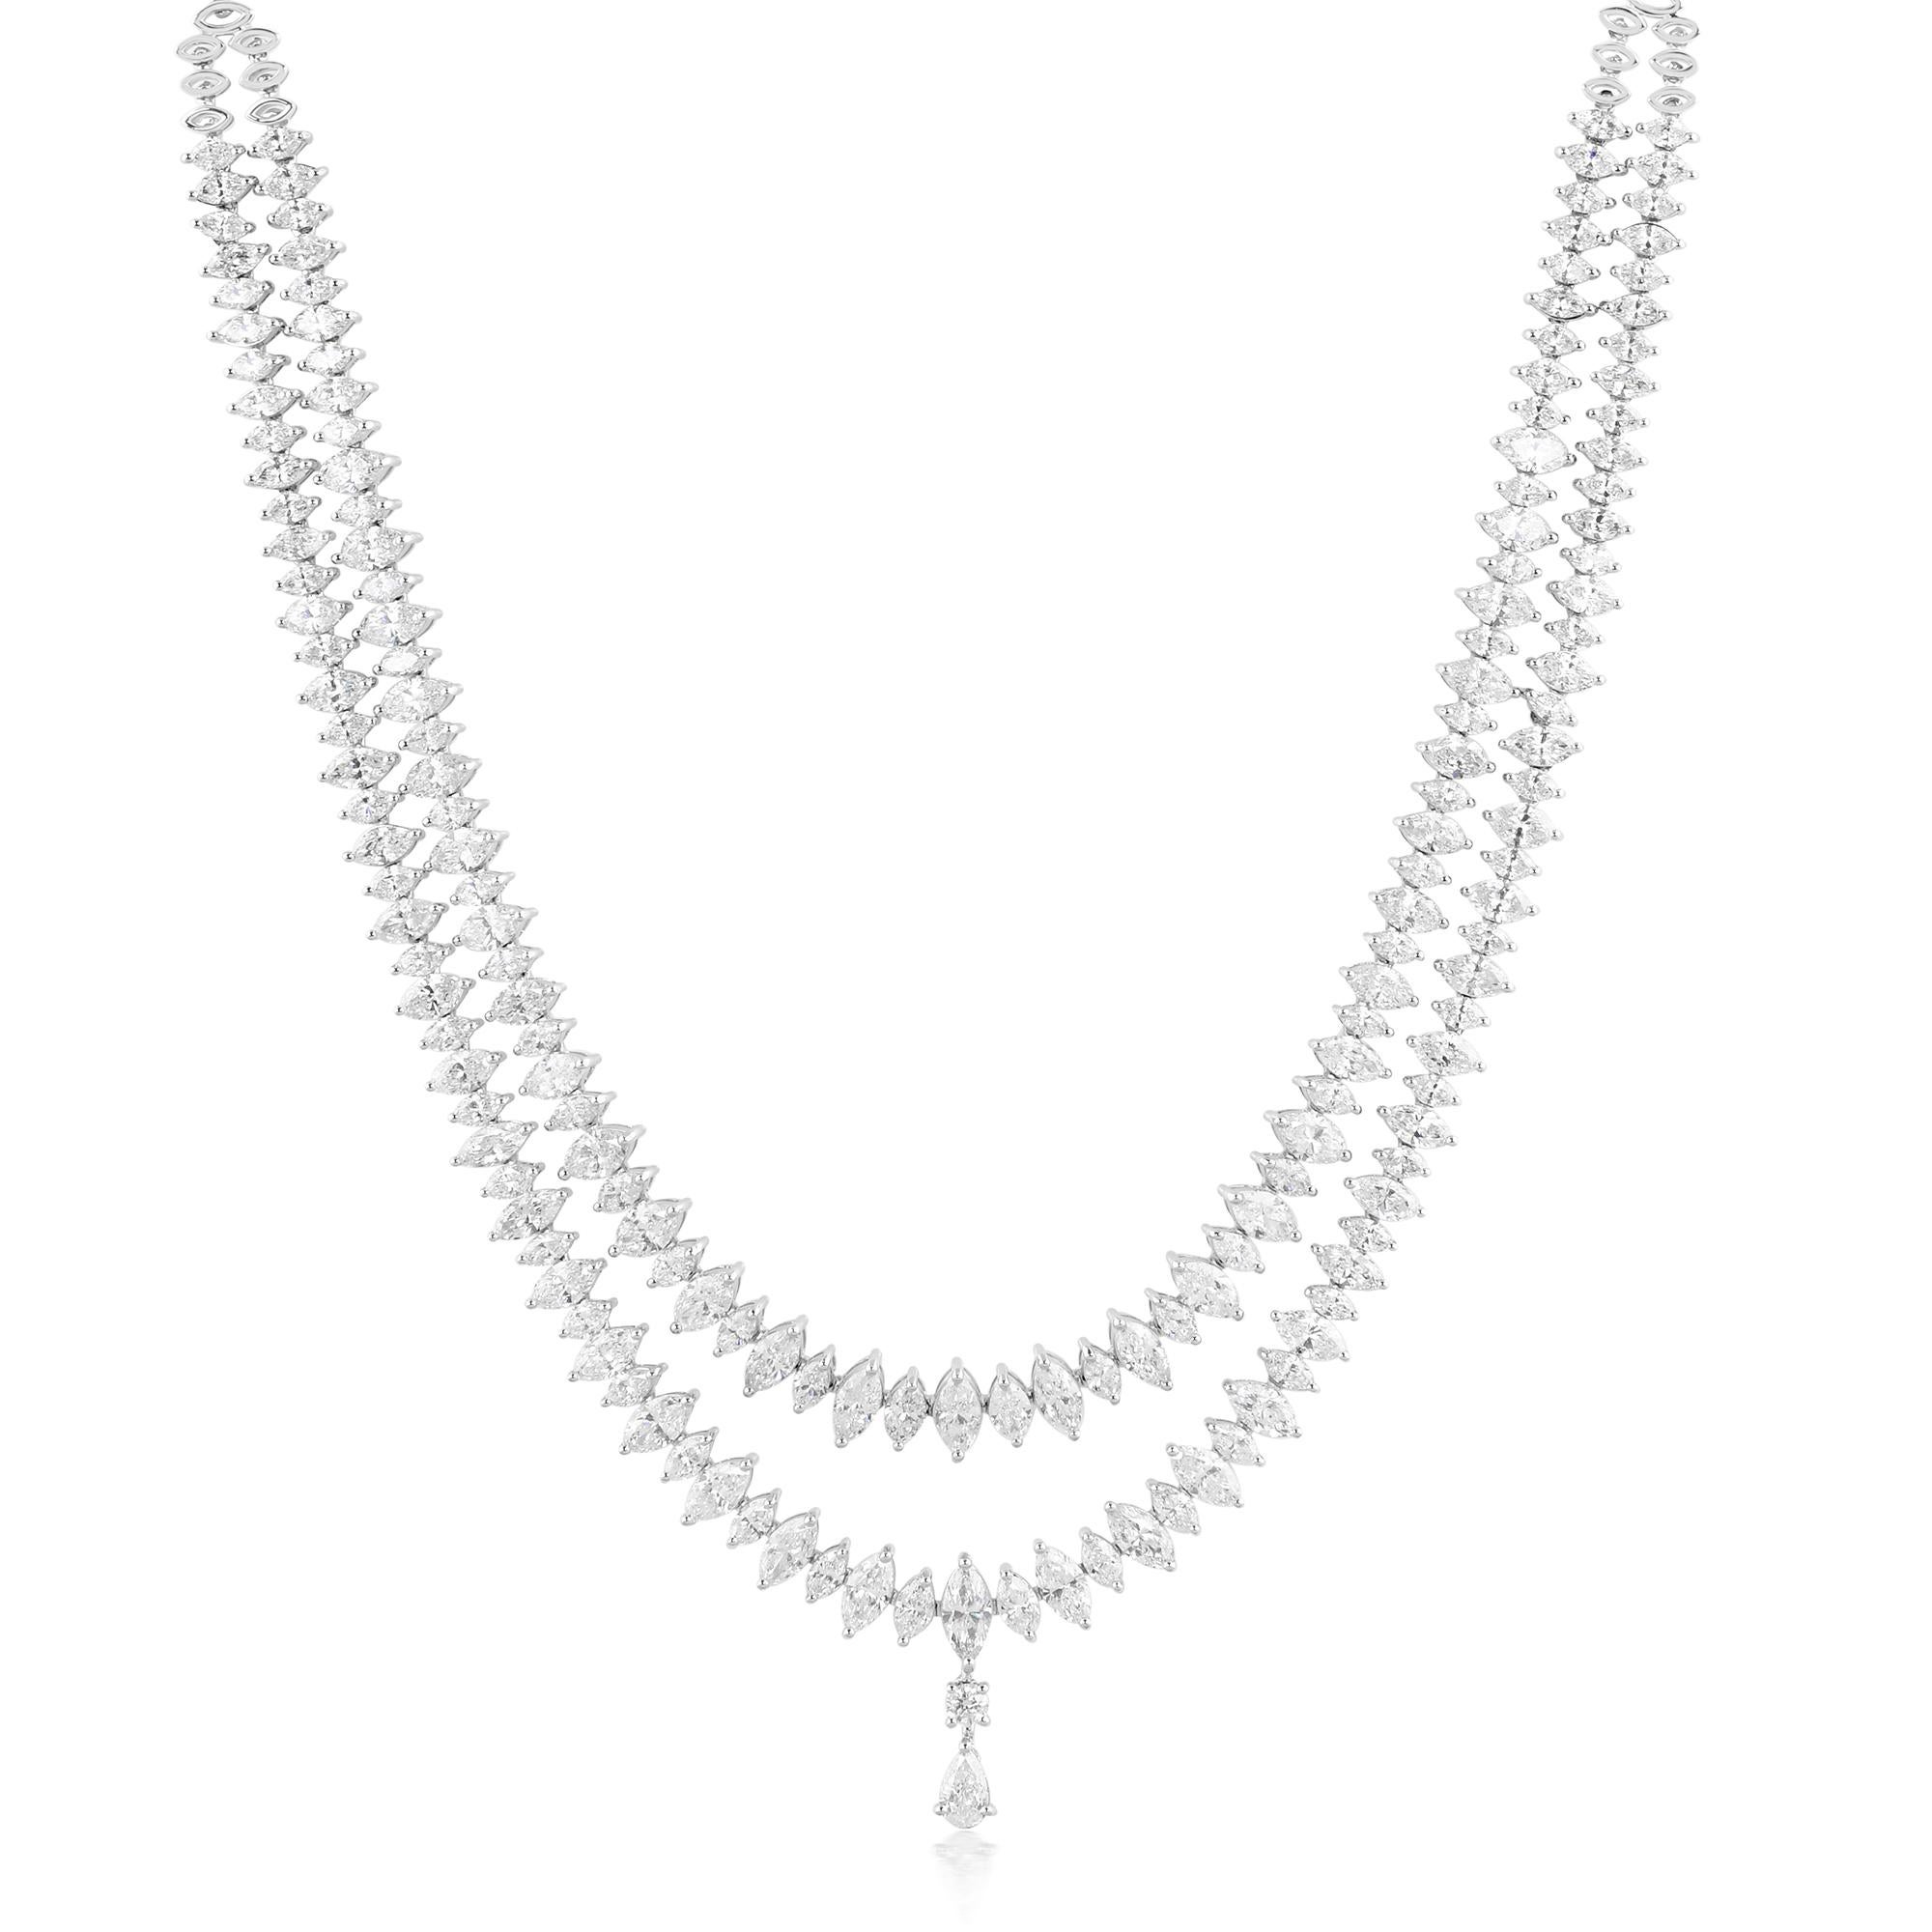 Experience the pinnacle of luxury with this Natural 25.58 Carat Marquise Diamond Necklace, a stunning masterpiece of fine jewelry crafted in opulent 18 Karat White Gold. Radiating brilliance and sophistication, this necklace showcases a breathtaking